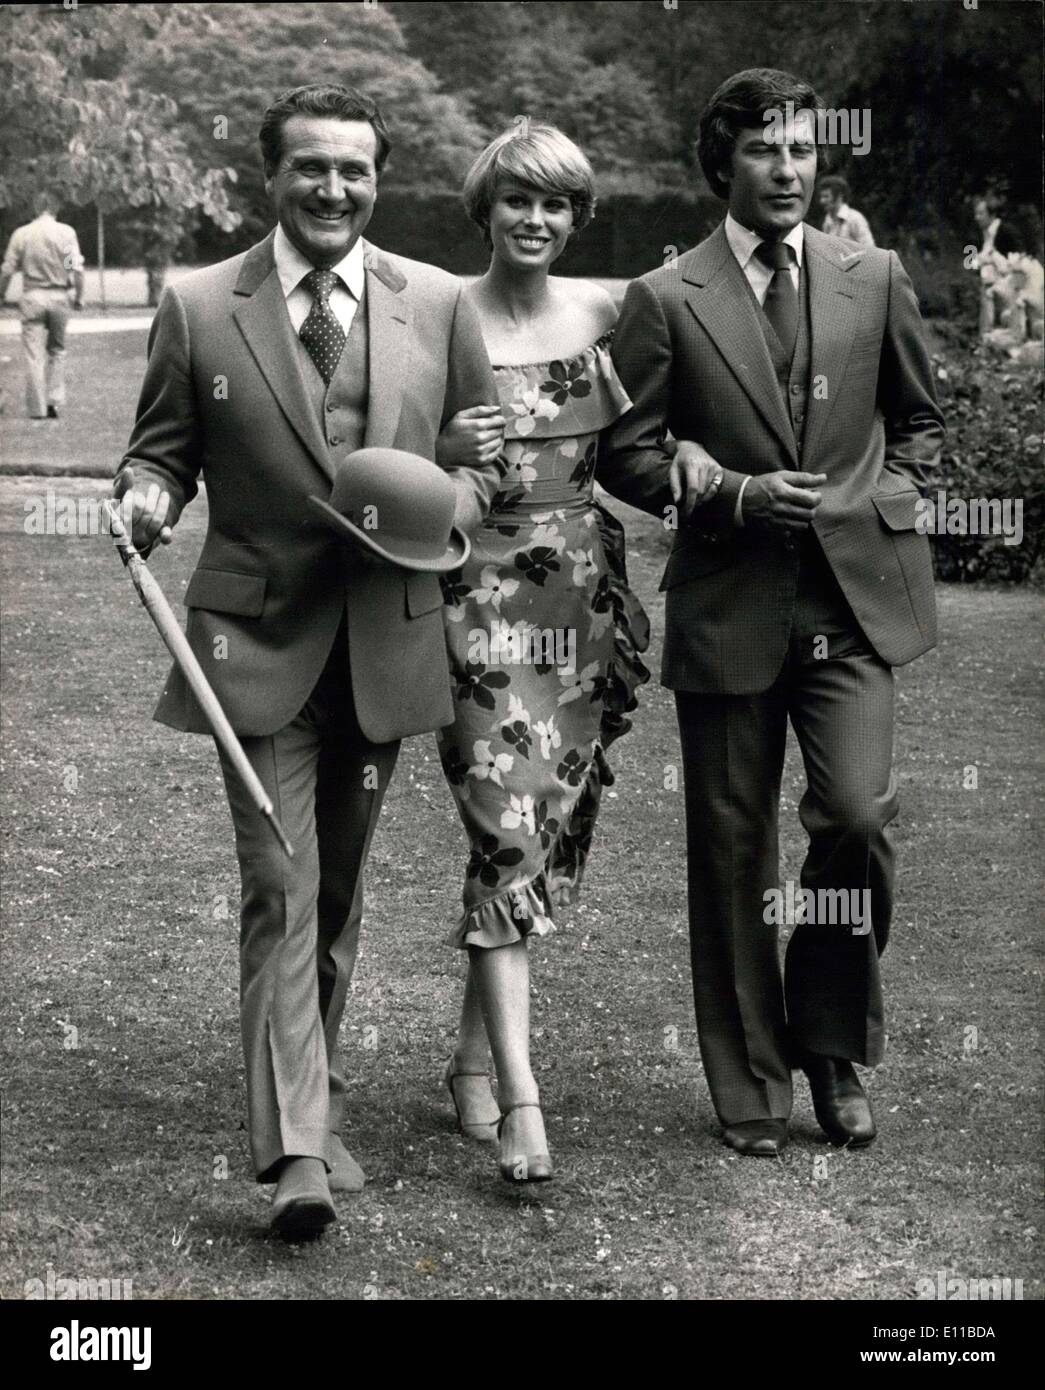 Jul. 12, 1976 - Stars of the New Adventure TV Series Get Together at Pinewood Studios. The principals of the new TV series ''The Avengers'' were pictured together for the first time at the Pinewood Studios today. They are Patric MacNee as John Steed, Joanna Lumley as Purdey, and Gareth Hunt as Mike Gambit. The old series of the Avengers grossed more than 7 million and about one third of this amount coming to Britain. OPS: The three Avengers (L to R), Patric MacNee, Joanna Lumley, and Gareth Hunt stride out during today photo call at Pinewood Studios. Stock Photo